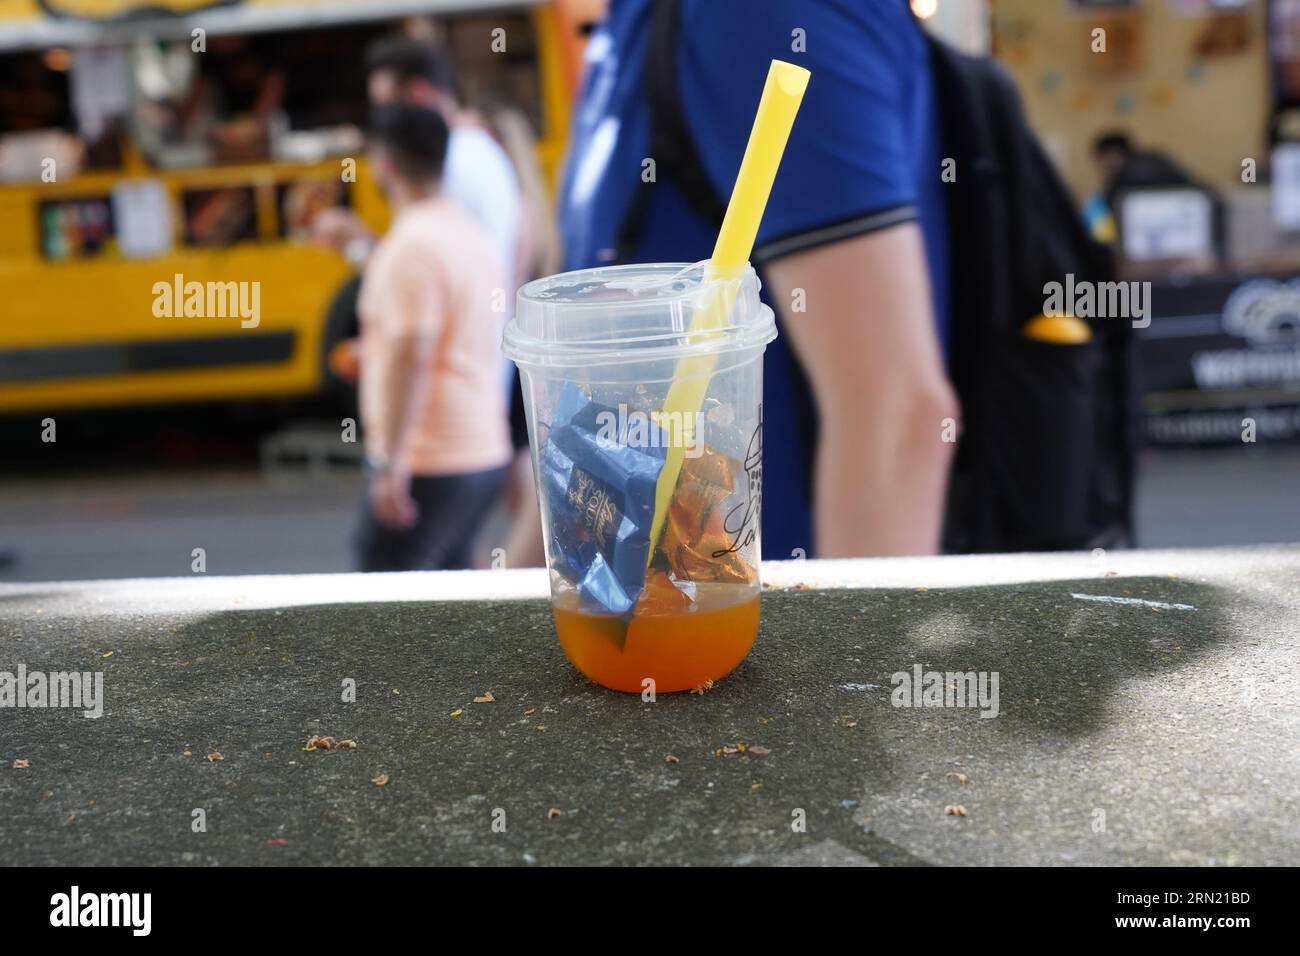 Plastic glass with orange drink, straw and small pieces of wrappers from chocolate lying on table as garbage. Stock Photo